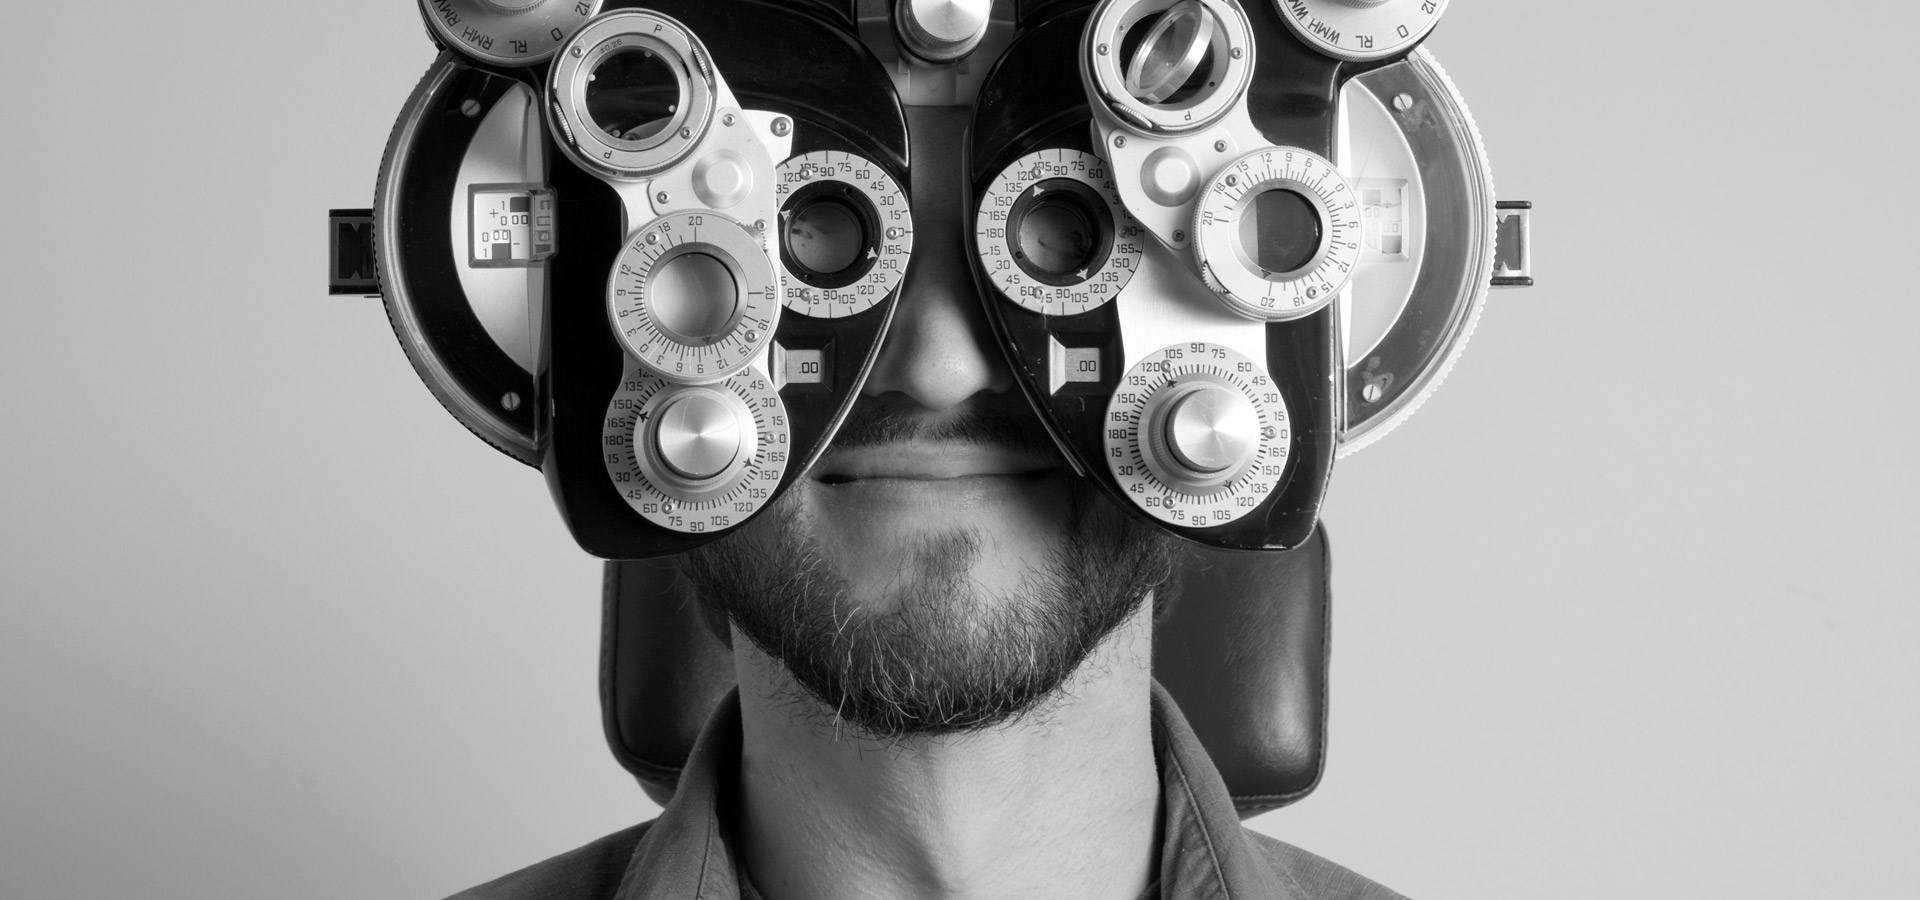 A man getting his eyes examined at the optometry office.